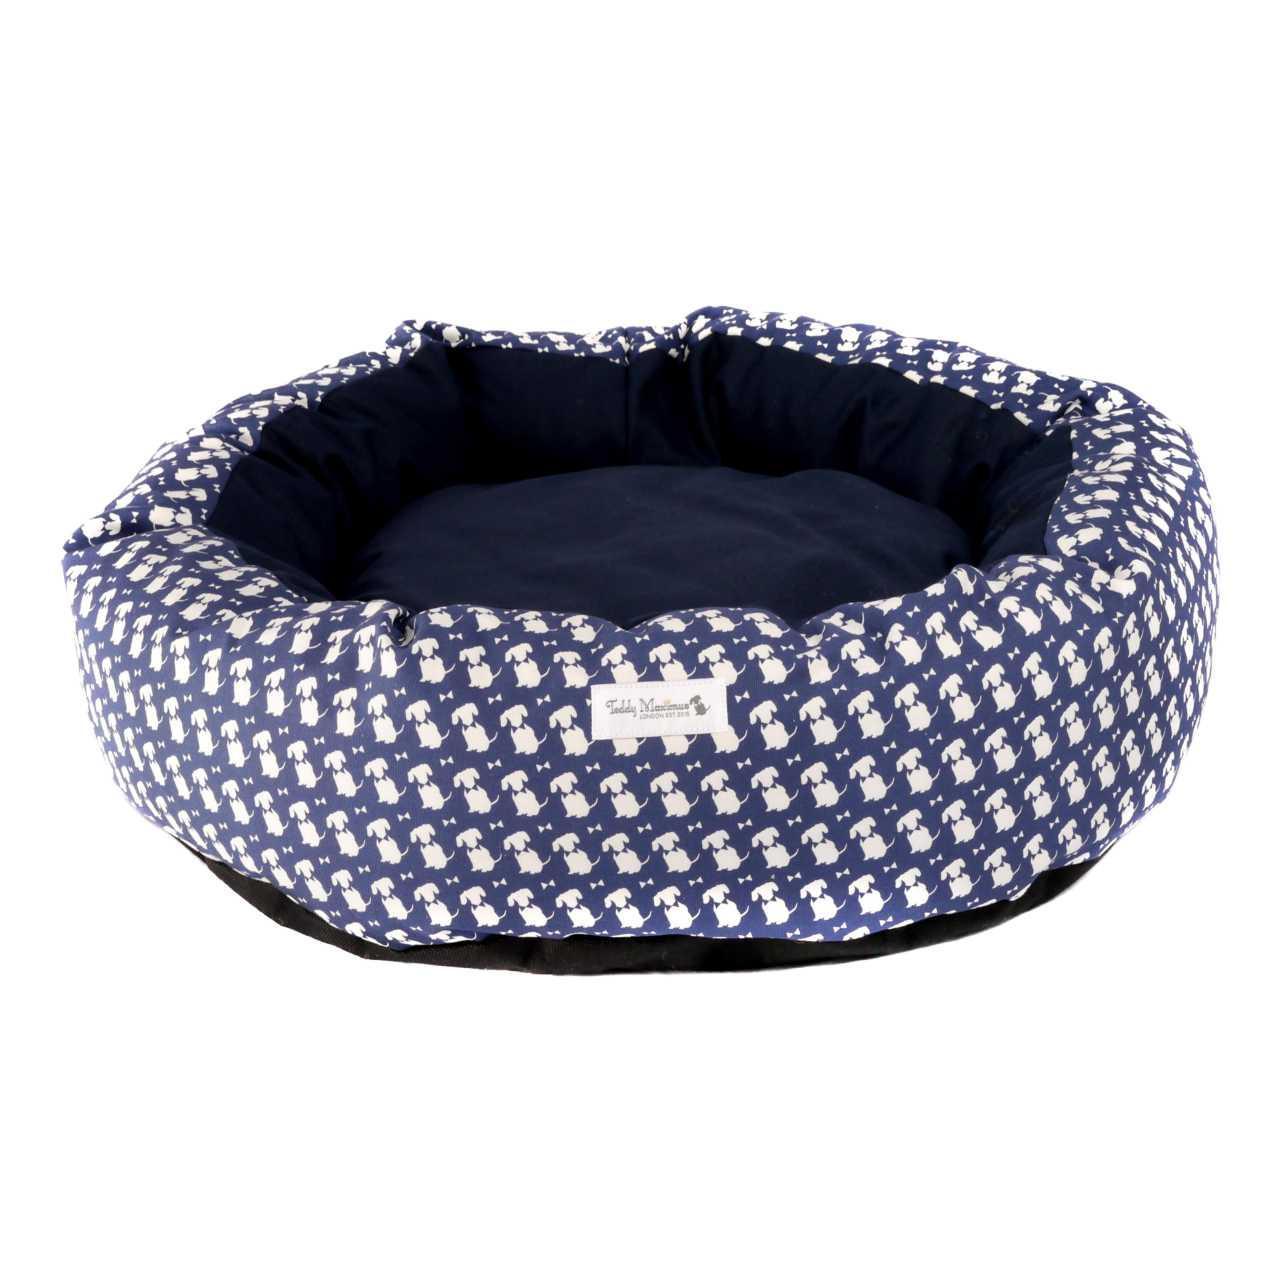 An image of Teddy Maximus Luxury Cocoon Bed Navy Signature Print